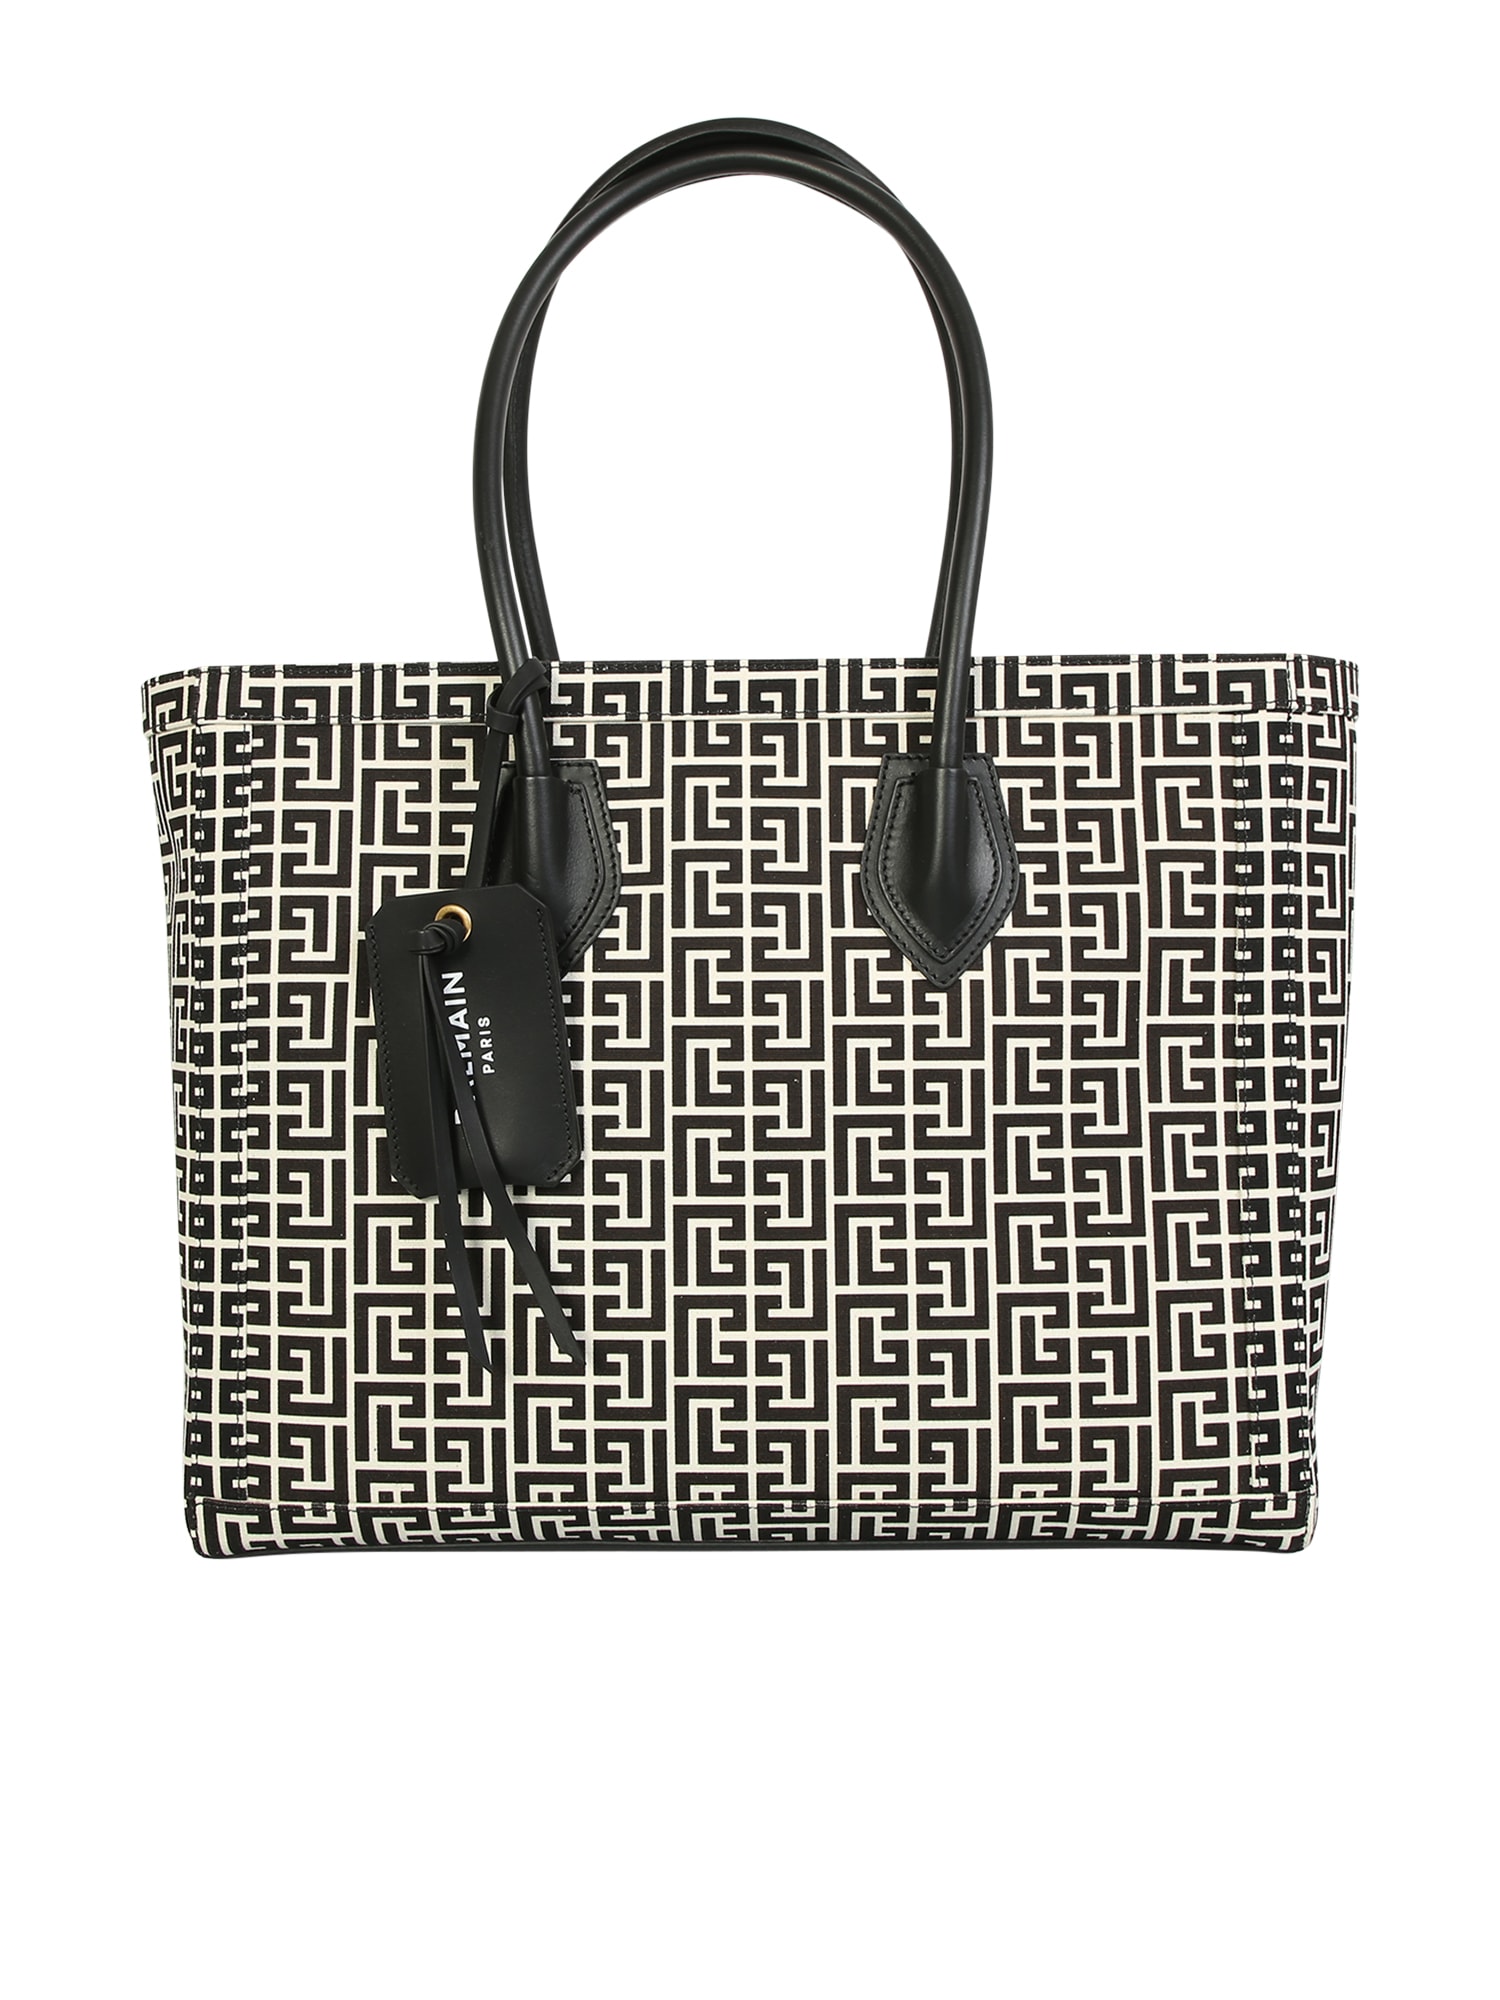 Balmain Monogram Shopper Bag With Iconic Logo, Comfortable And Ideal For Everyday Looks